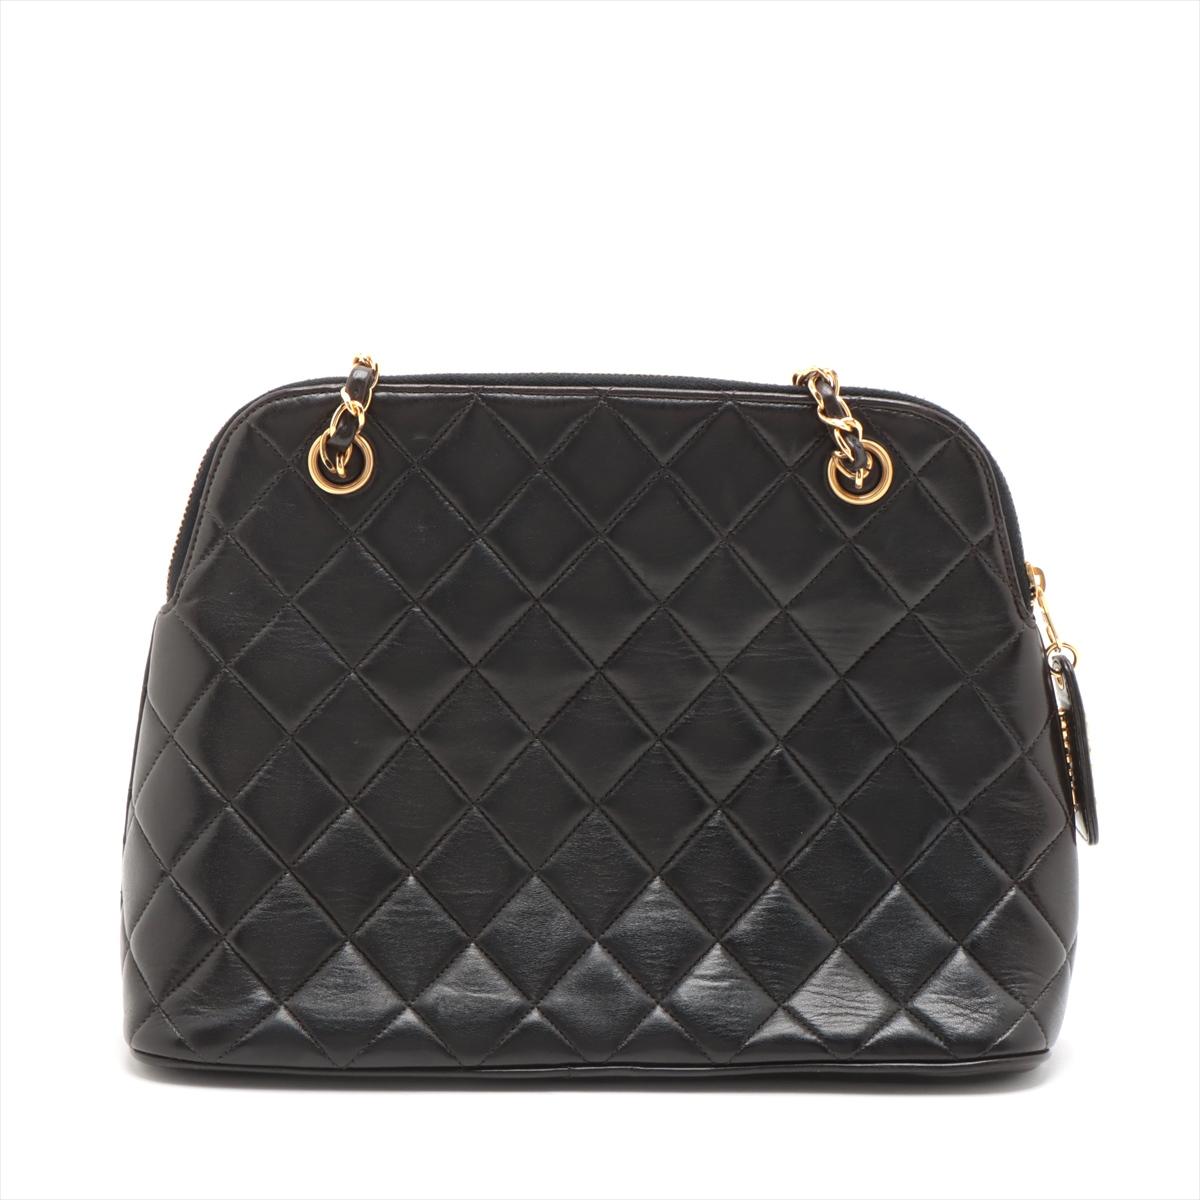 Chanel Matelasse Lambskin Chain Shoulder Bag Black In Good Condition For Sale In Indianapolis, IN